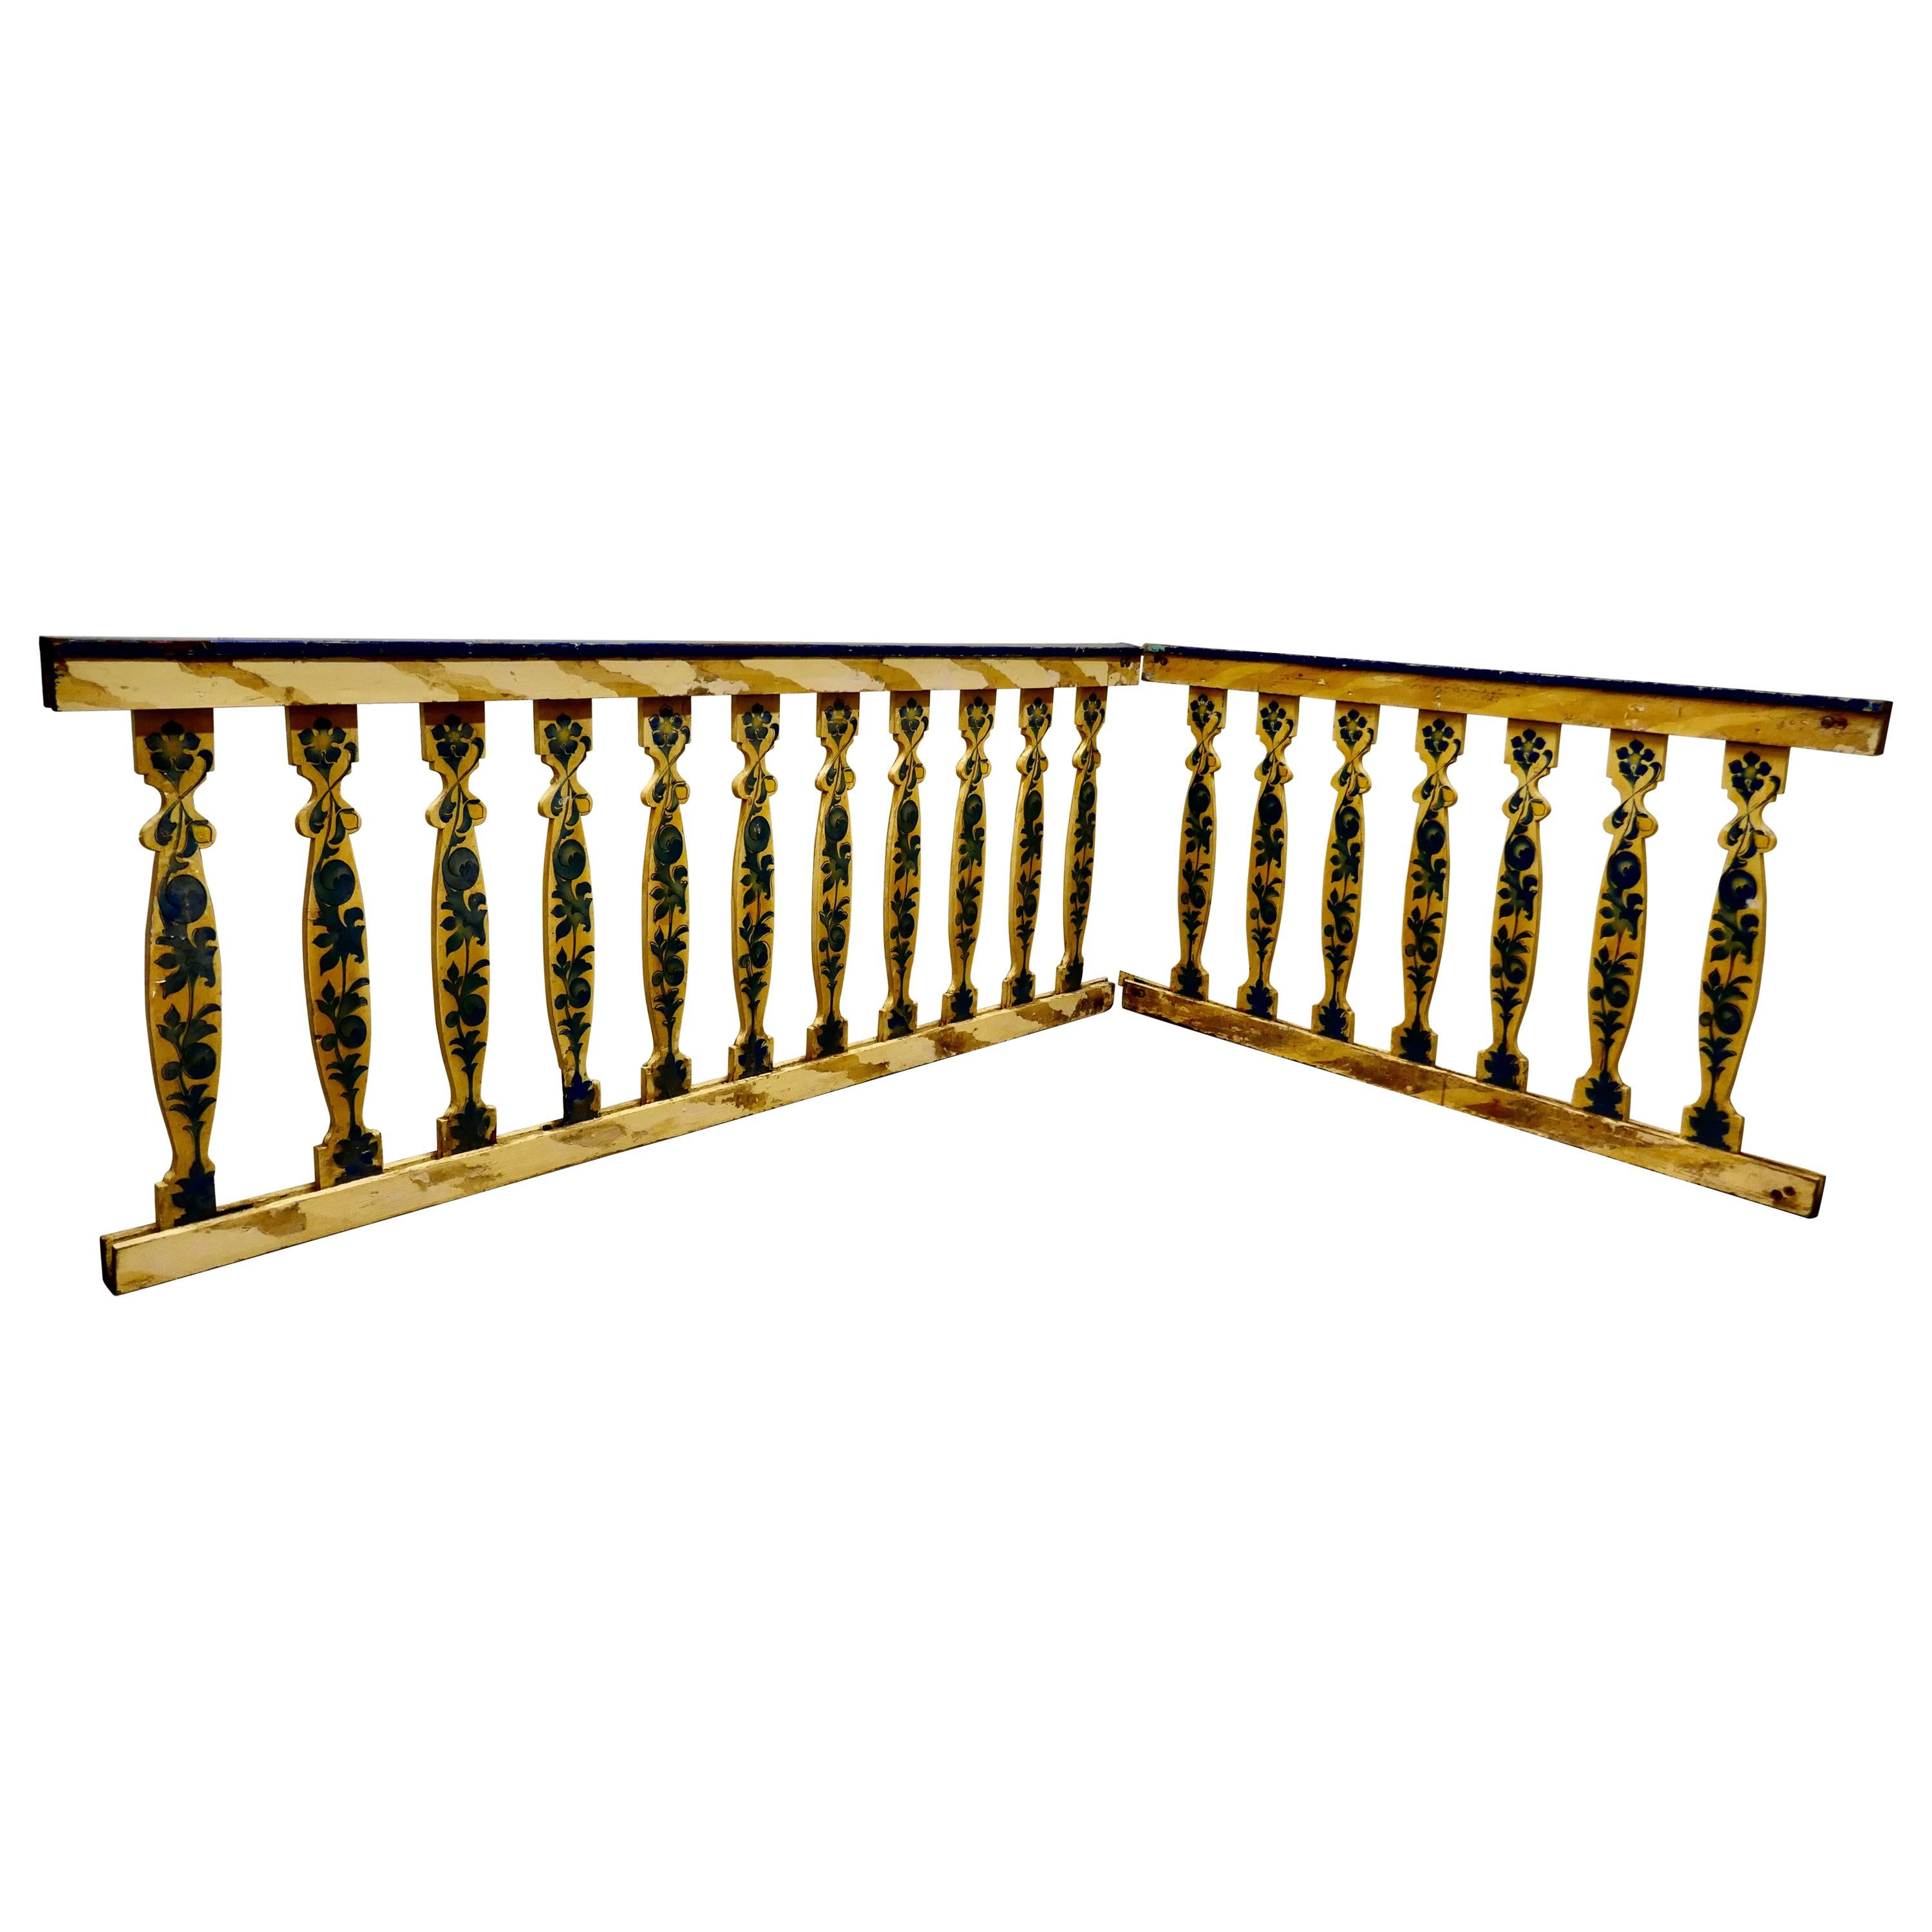 Hand Painted Wooden Railings from a Fair Ground For Sale